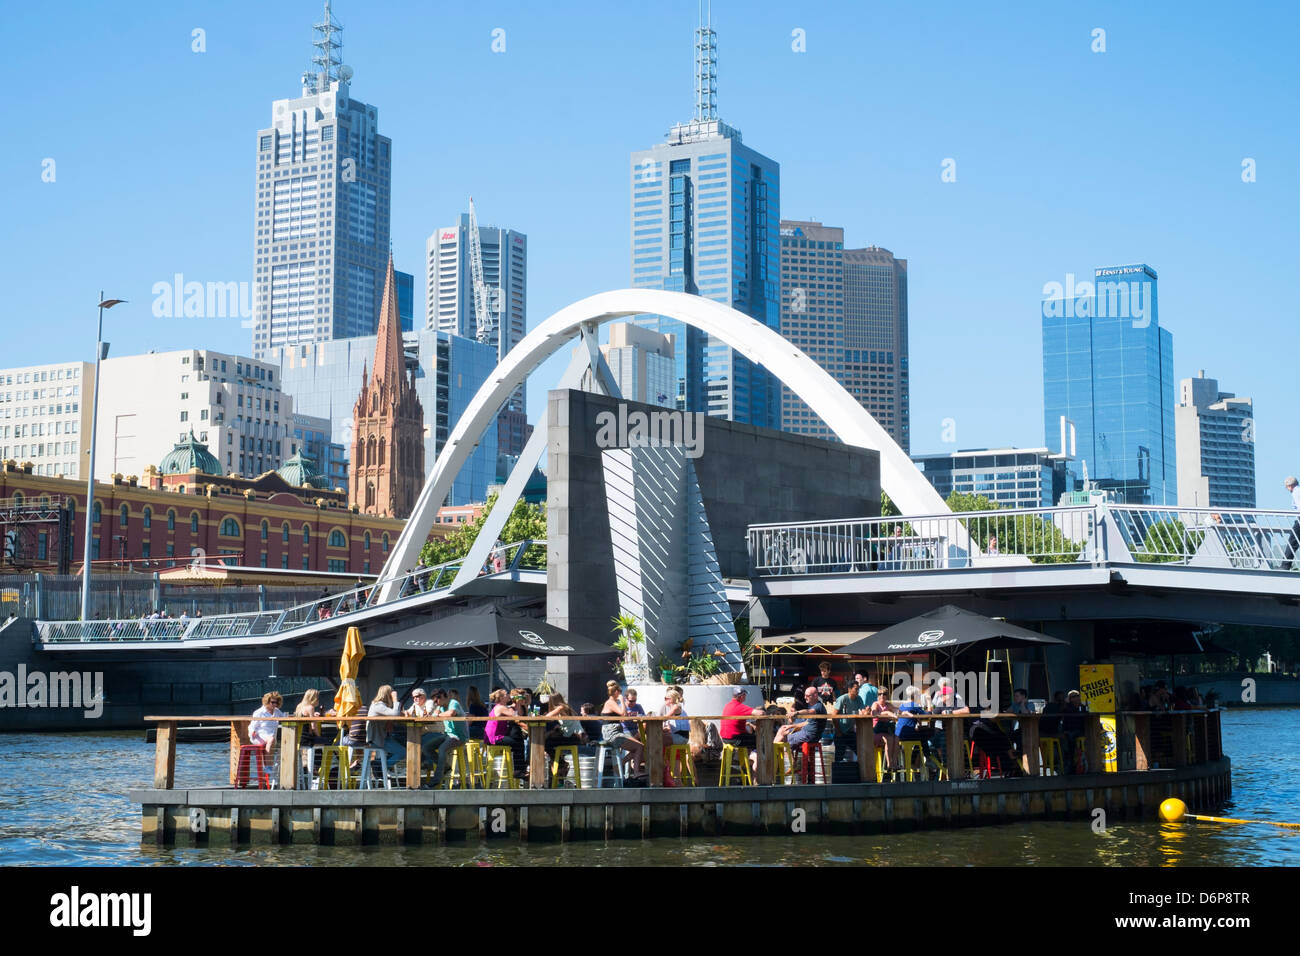 Bar located ion Ponyfish Island on Yarra River in central Melbourne Australia Stock Photo